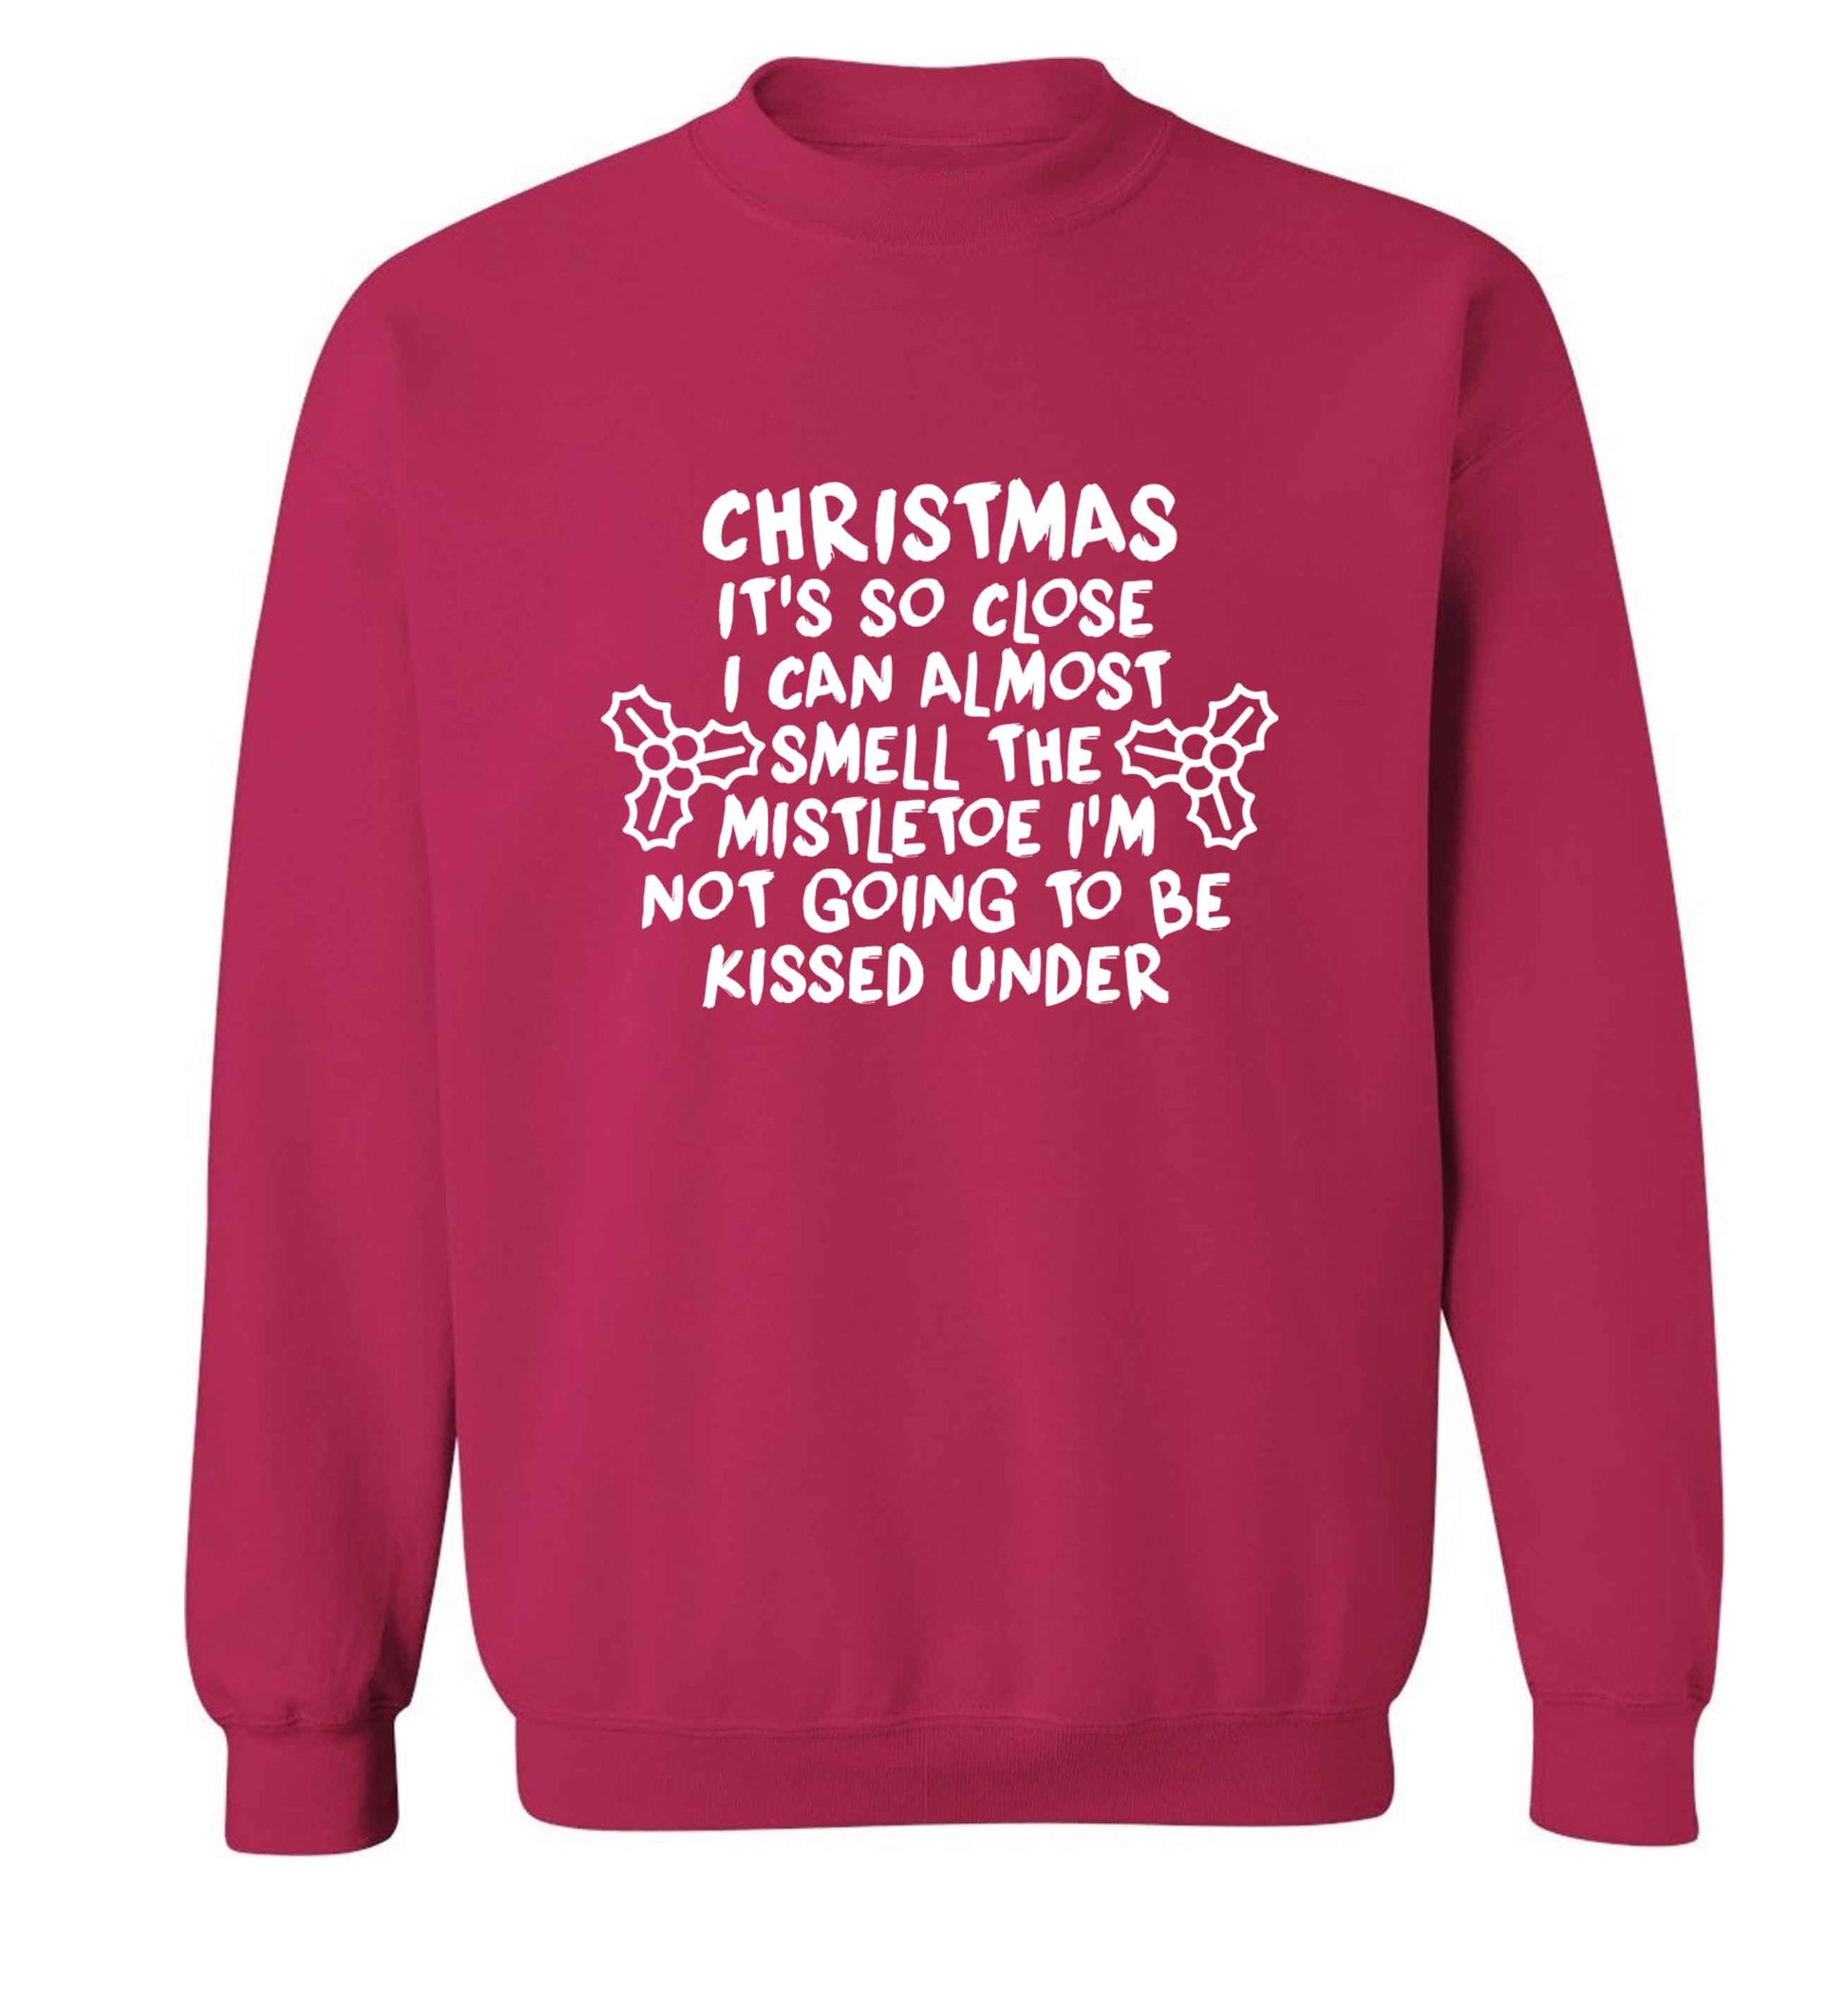 Christmas it's so close I can almost smell the misteltoe I'm not going to be kissed under adult's unisex pink sweater 2XL